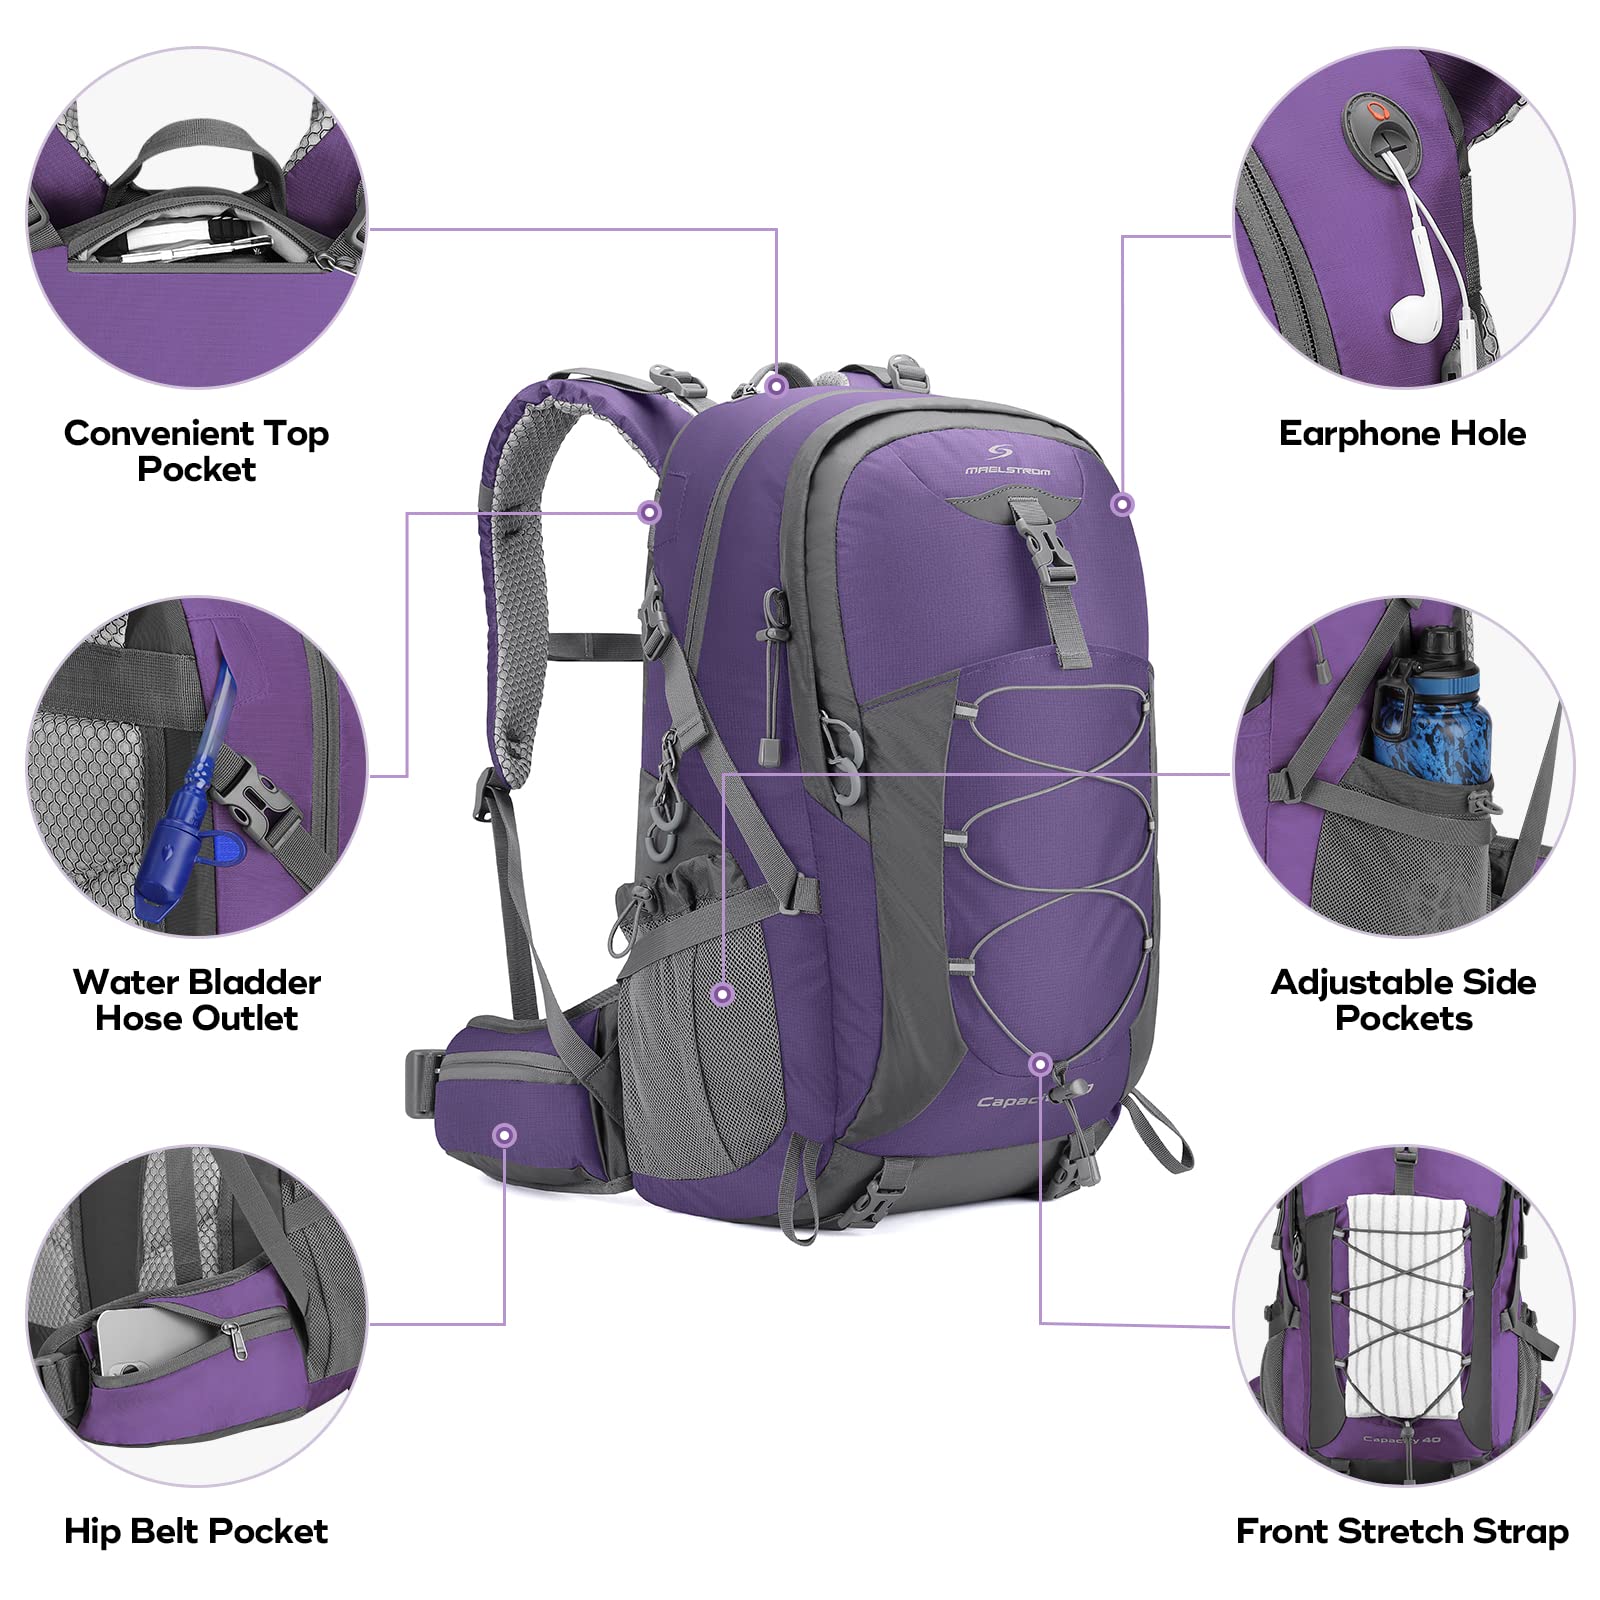 Maelstrom Hiking Backpack,Camping Backpack,40L Waterproof Hiking Daypack with Rain Cover,Lightweight Travel Backpack,Purple